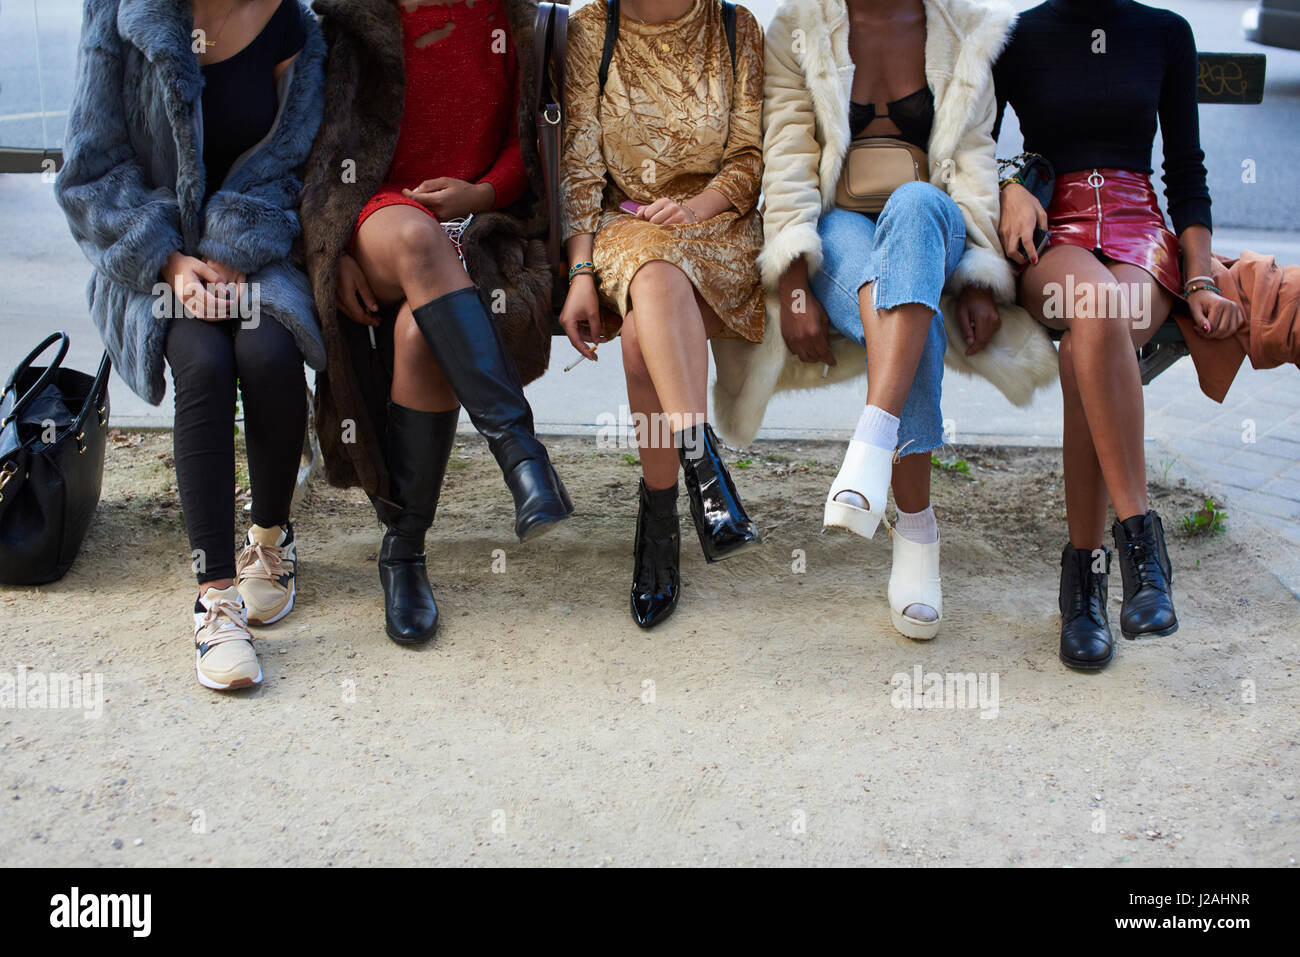 Five fashionable women sitting in a row on a bench, crop Stock Photo